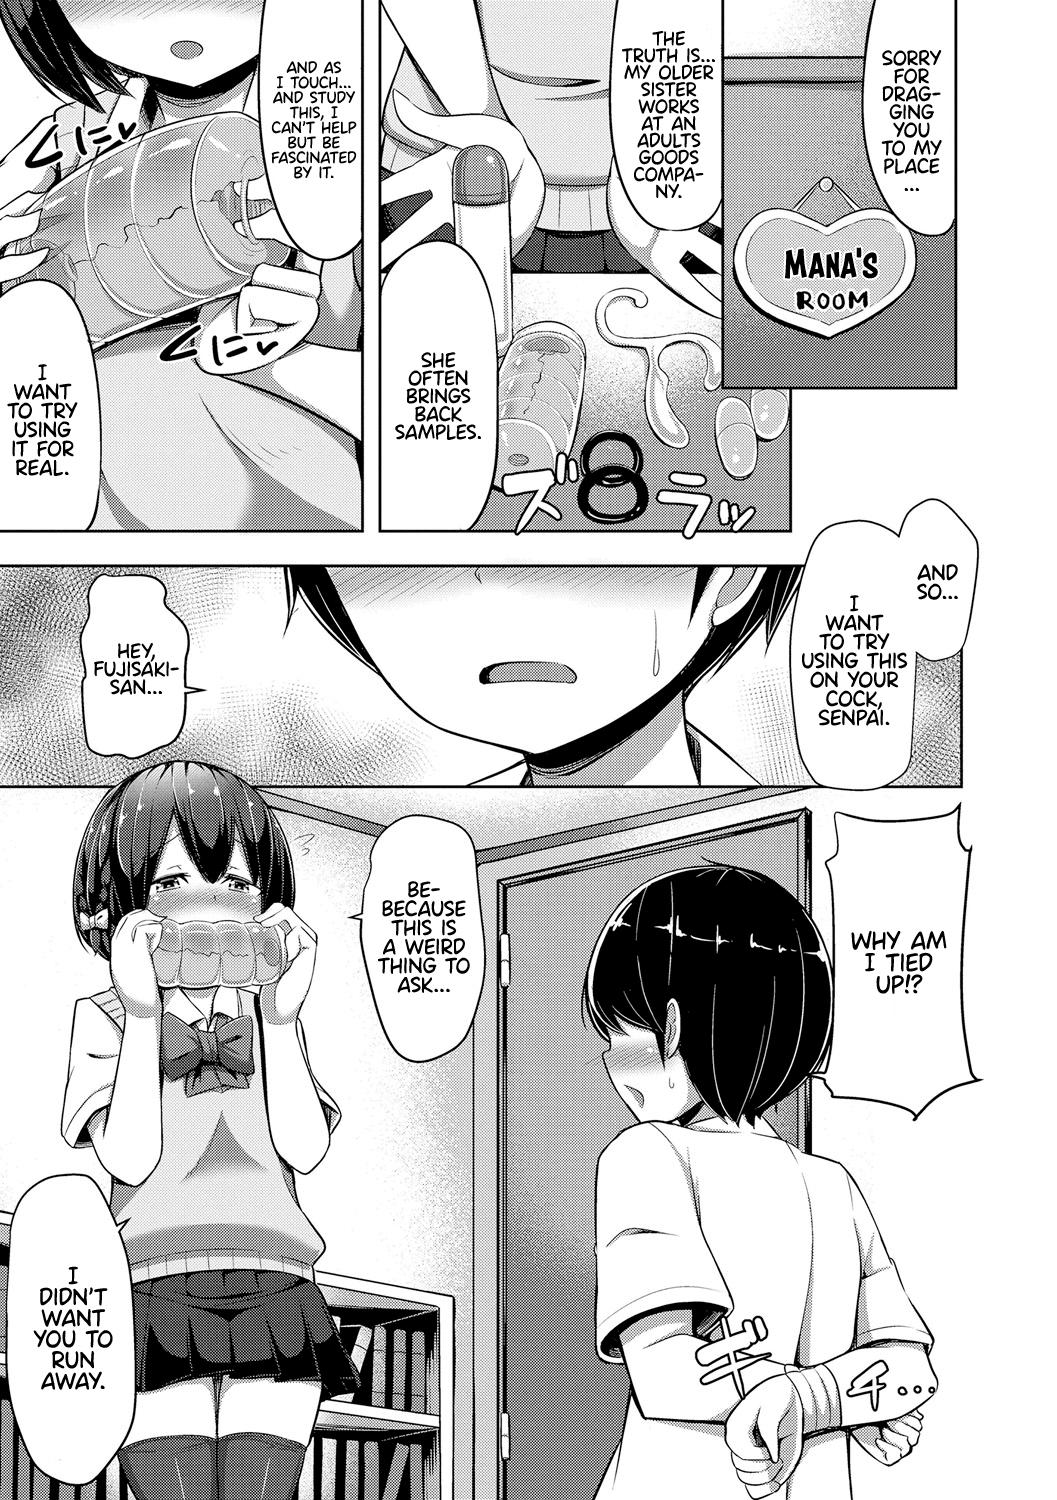 Buttfucking Afterschool ♥ Onahole~ Amature Allure - Page 3